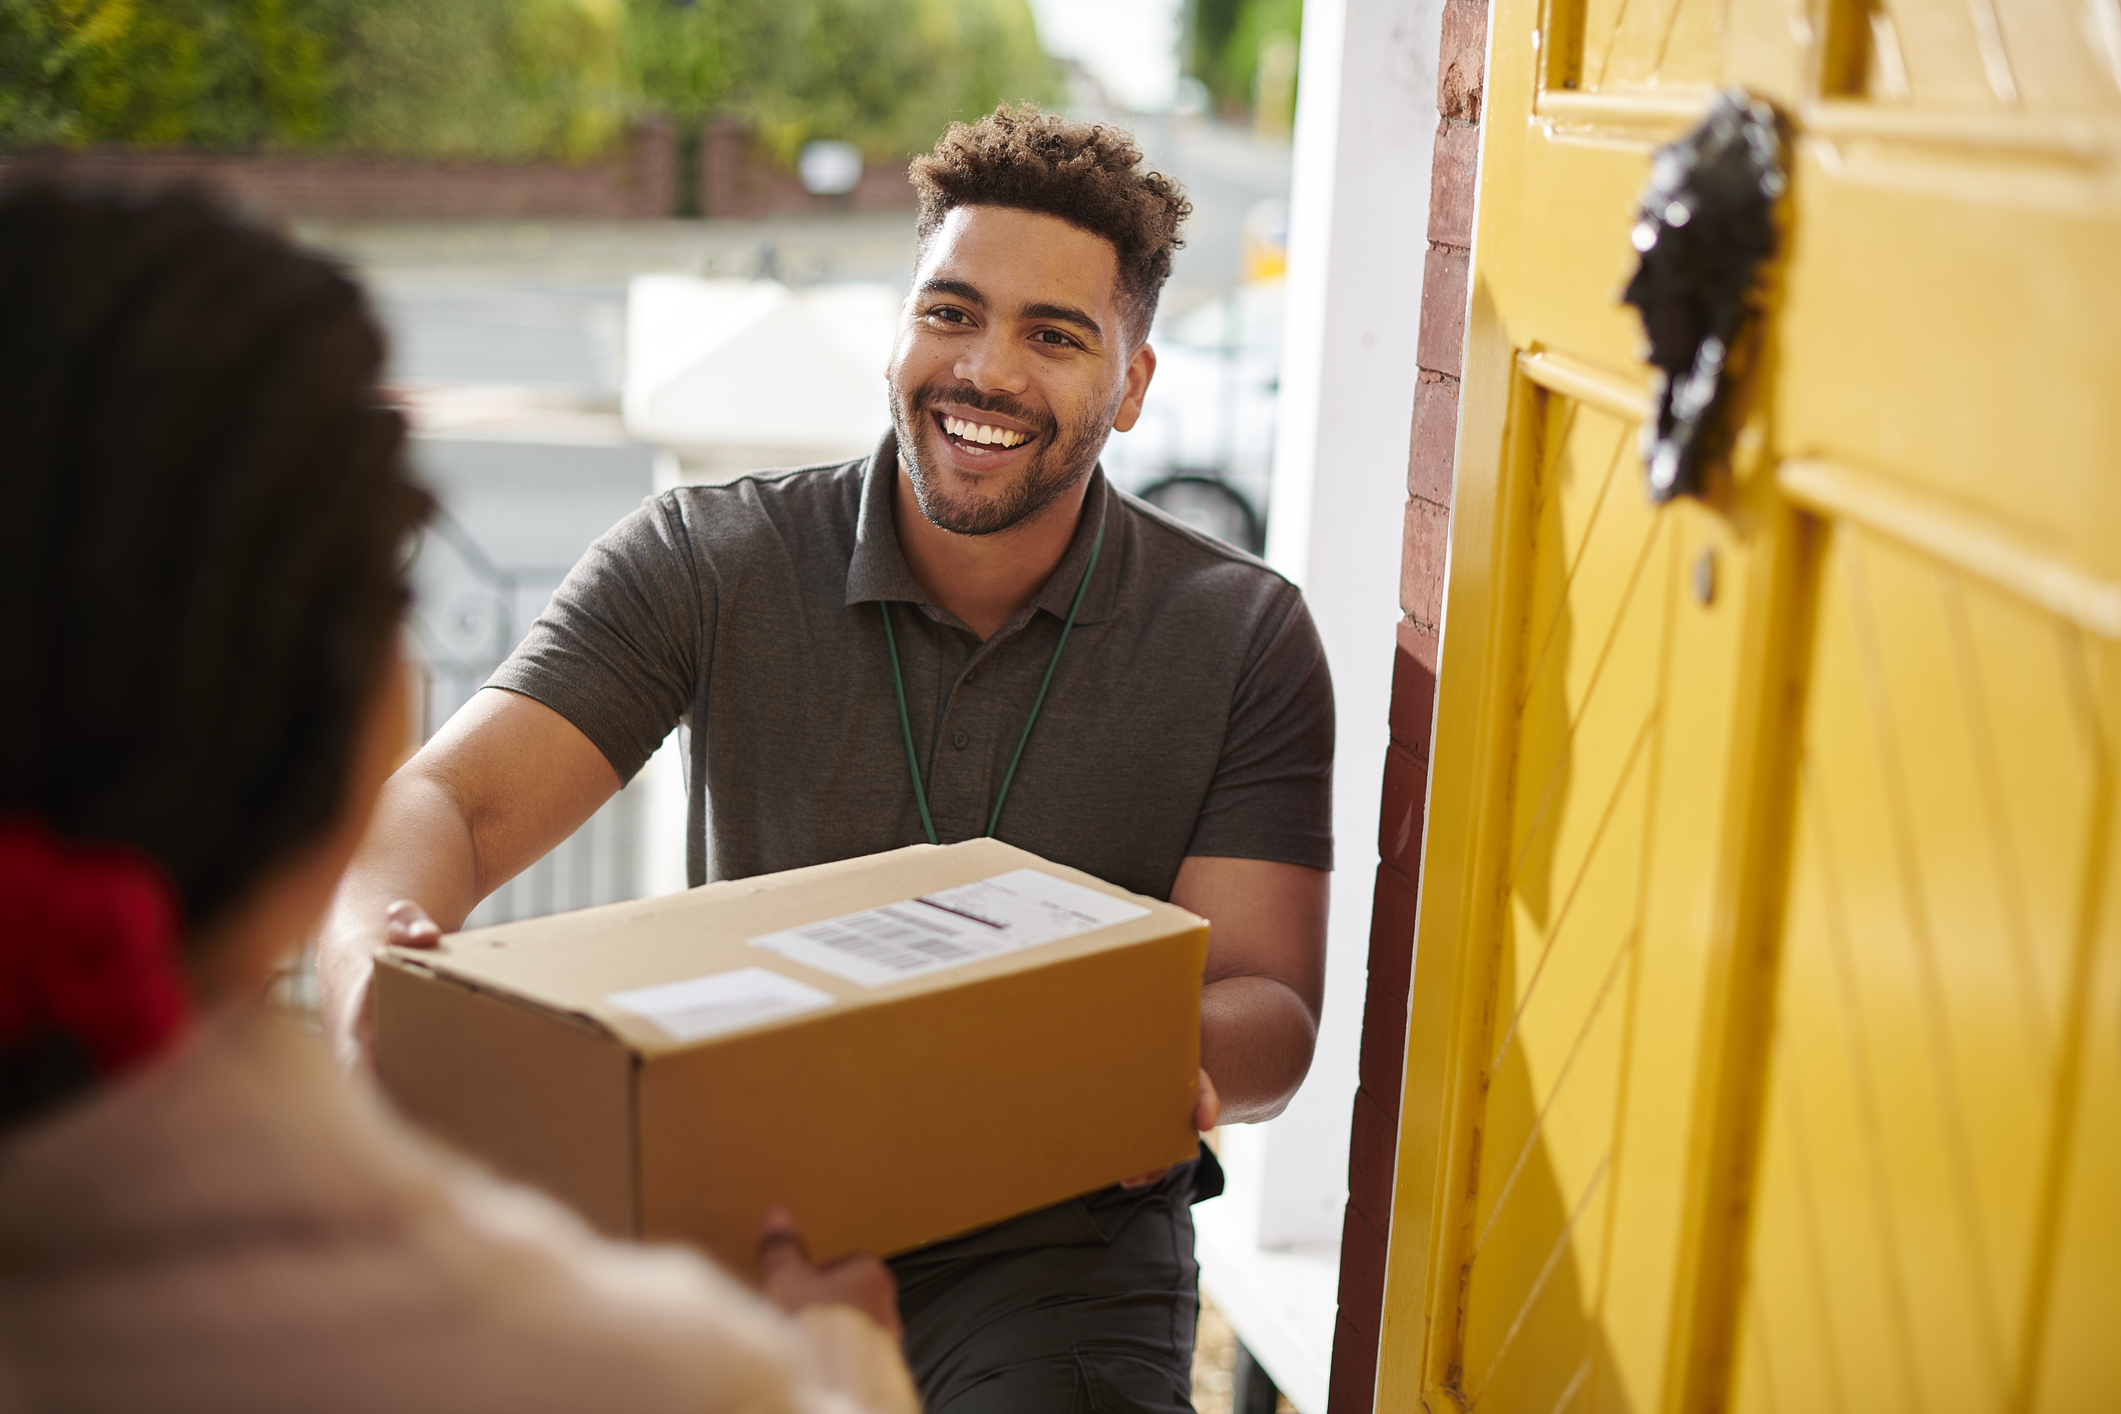 Discover Hassle-Free Magnolia Shipping Services at the UPS Store